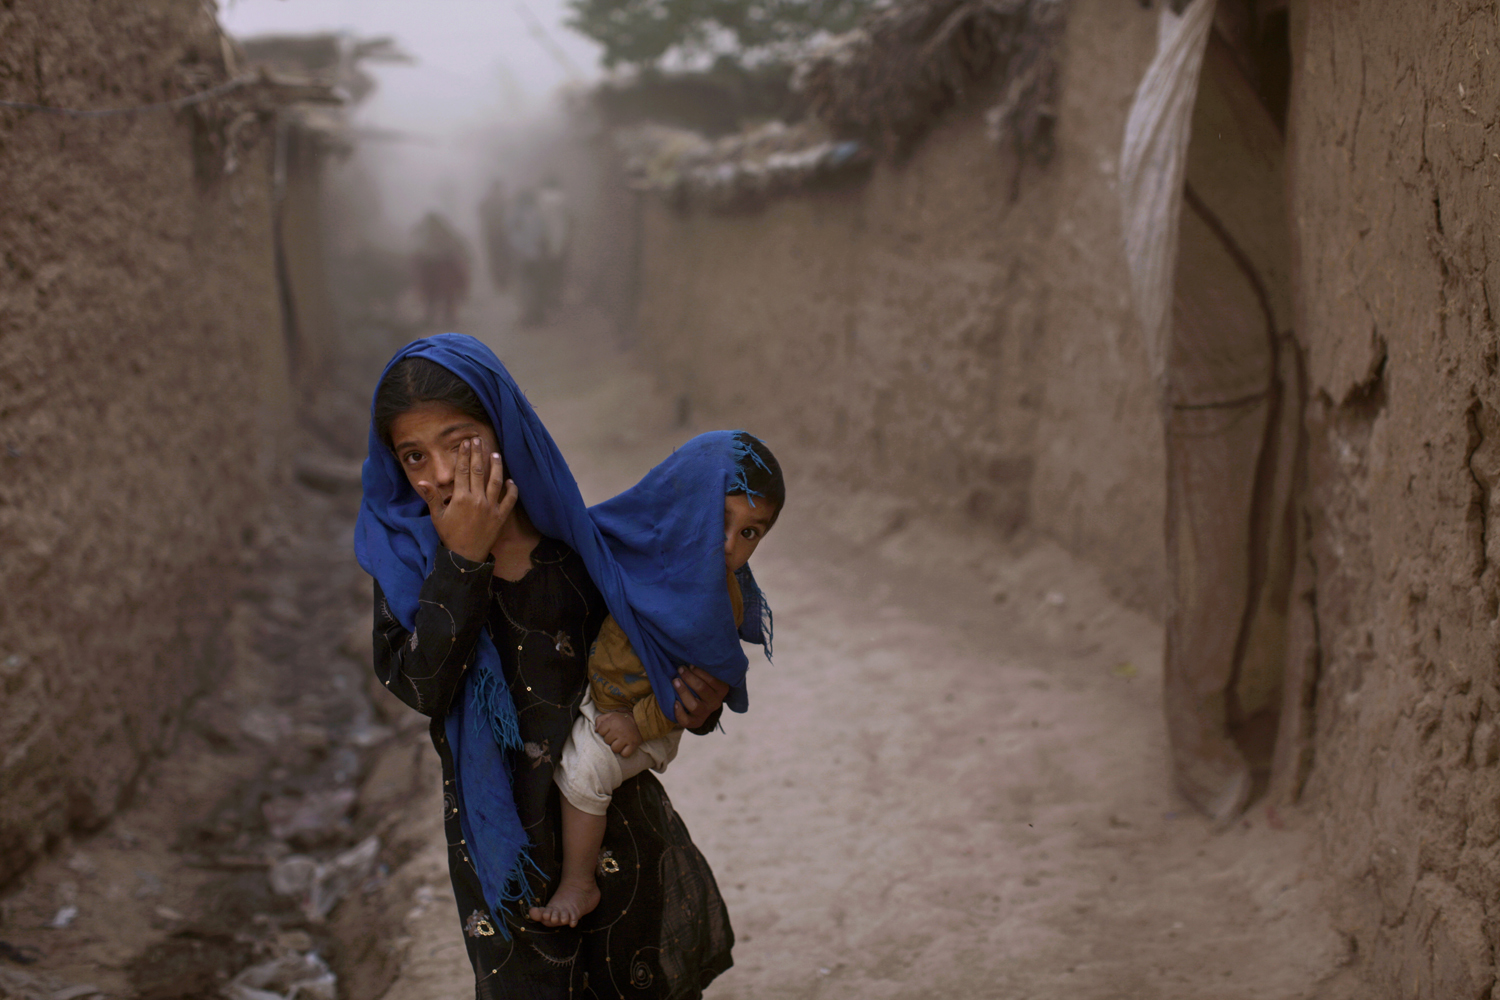 June 5, 2012. An Afghan refugee and her brother get caught in a sandstorm in a slum on the outskirts of Islamabad.